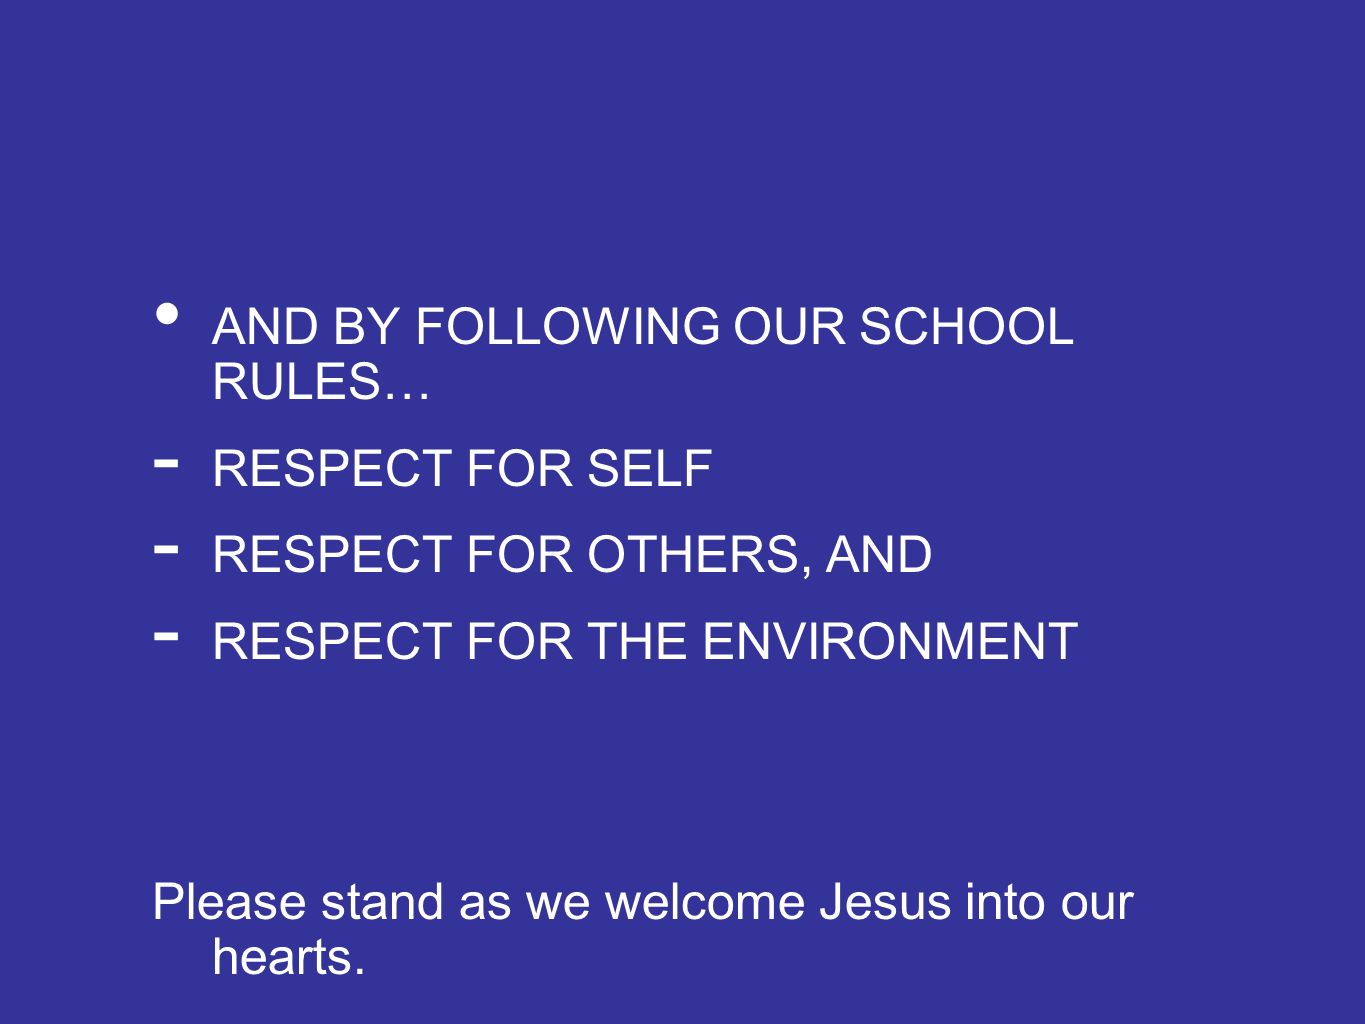 AND BY FOLLOWING OUR SCHOOL RULES… - RESPECT FOR SELF - RESPECT FOR OTHERS, AND - RESPECT FOR THE ENVIRONMENT Please stand as we welcome Jesus into our hearts.